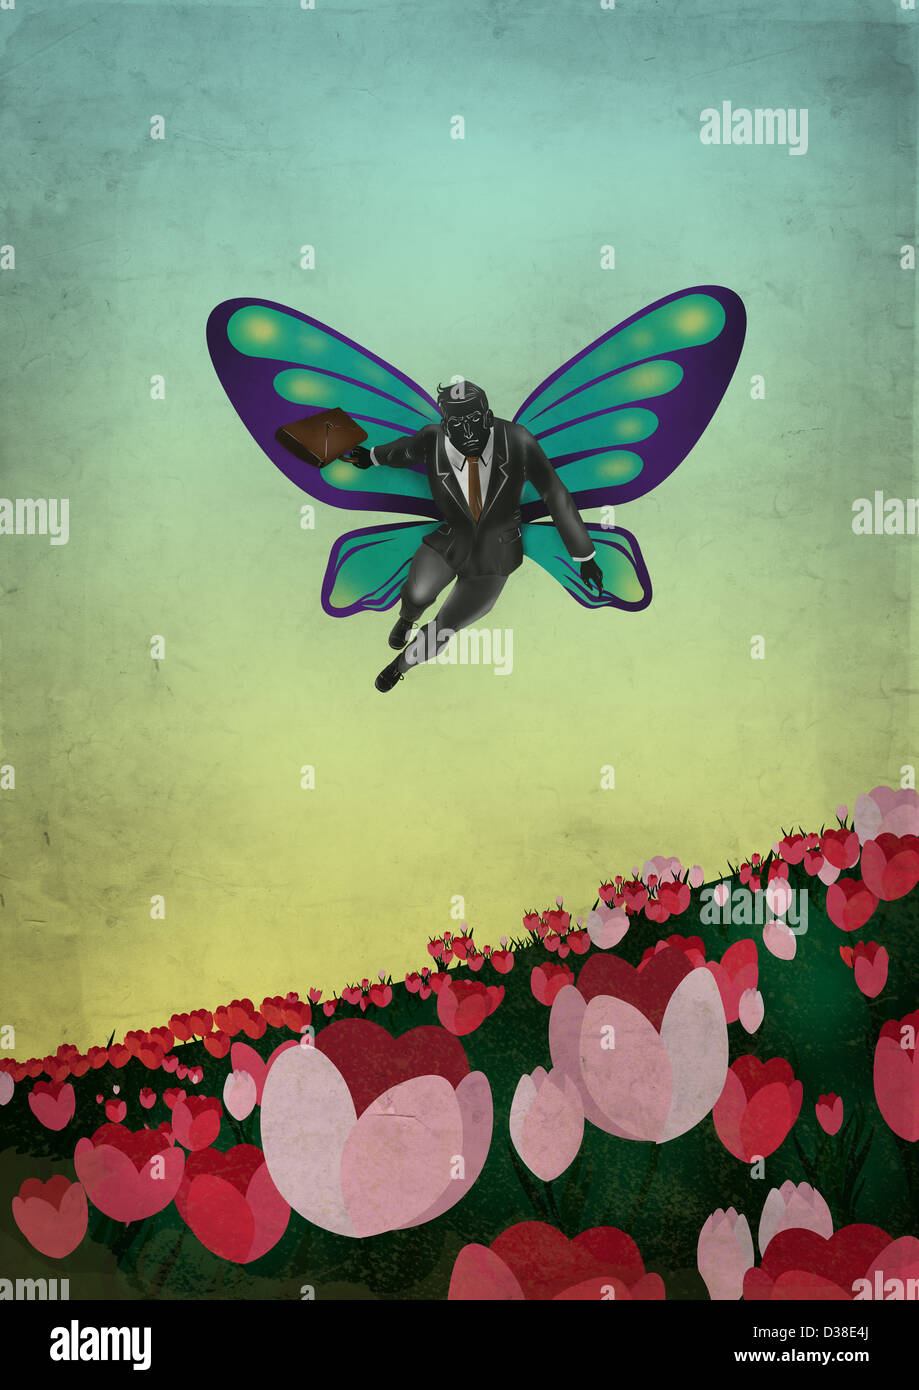 Illustrative image of businessman flying with butterfly's wings over flowers representing business venture Stock Photo